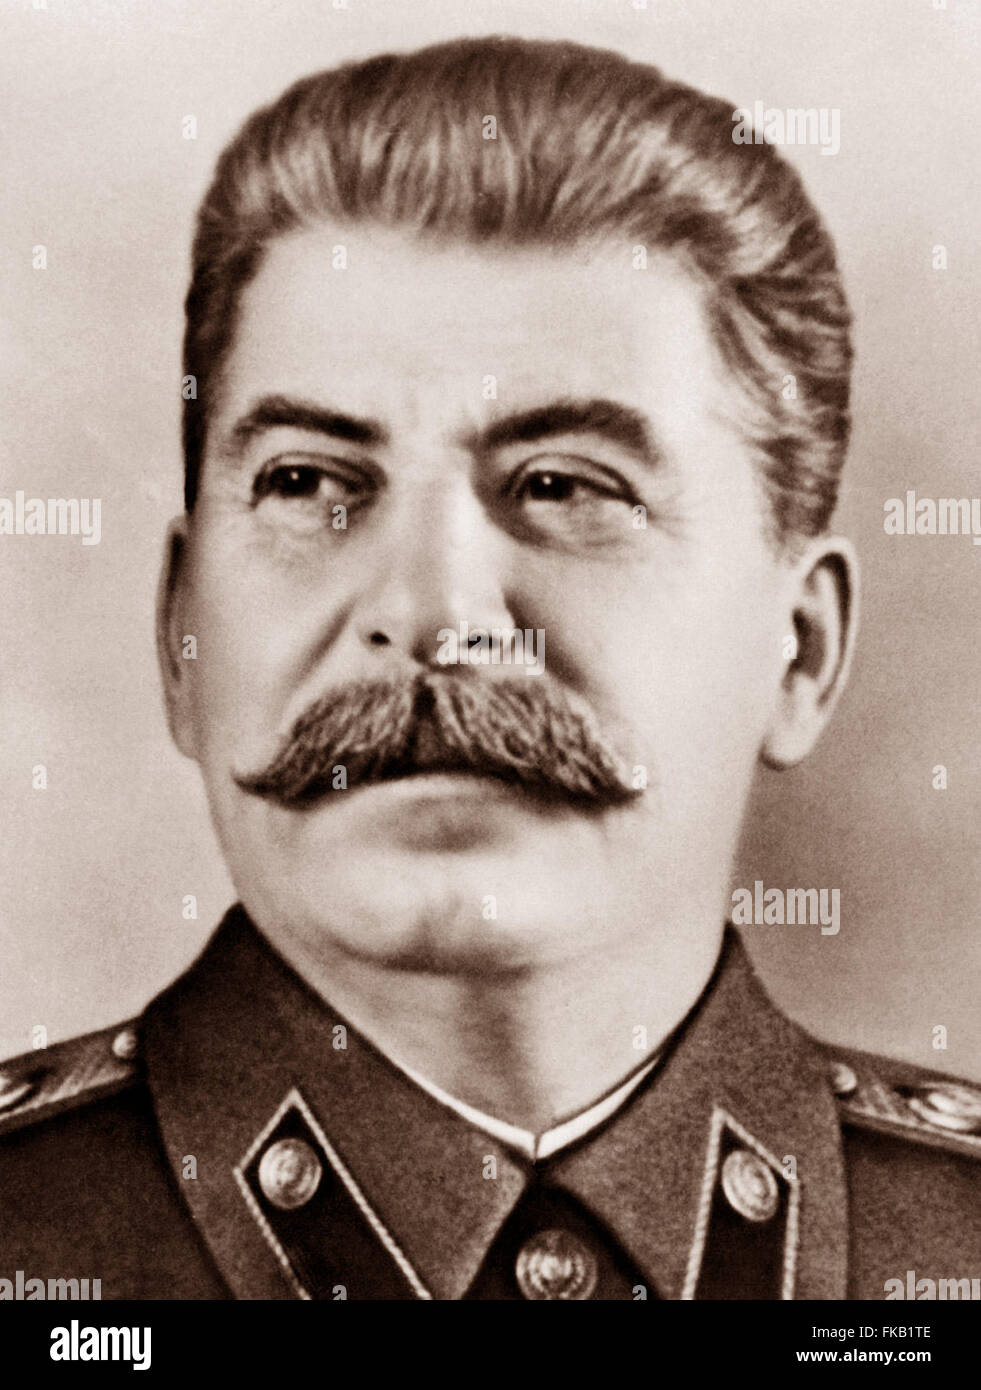 Joseph Vissarionovich Stalin was the Premier of the Soviet Union from 6 May 1941 until his death in 5 March 1953. 1942 image from Archives of Press Portrait Service - formerly Press Portrait Bureau Stock Photo